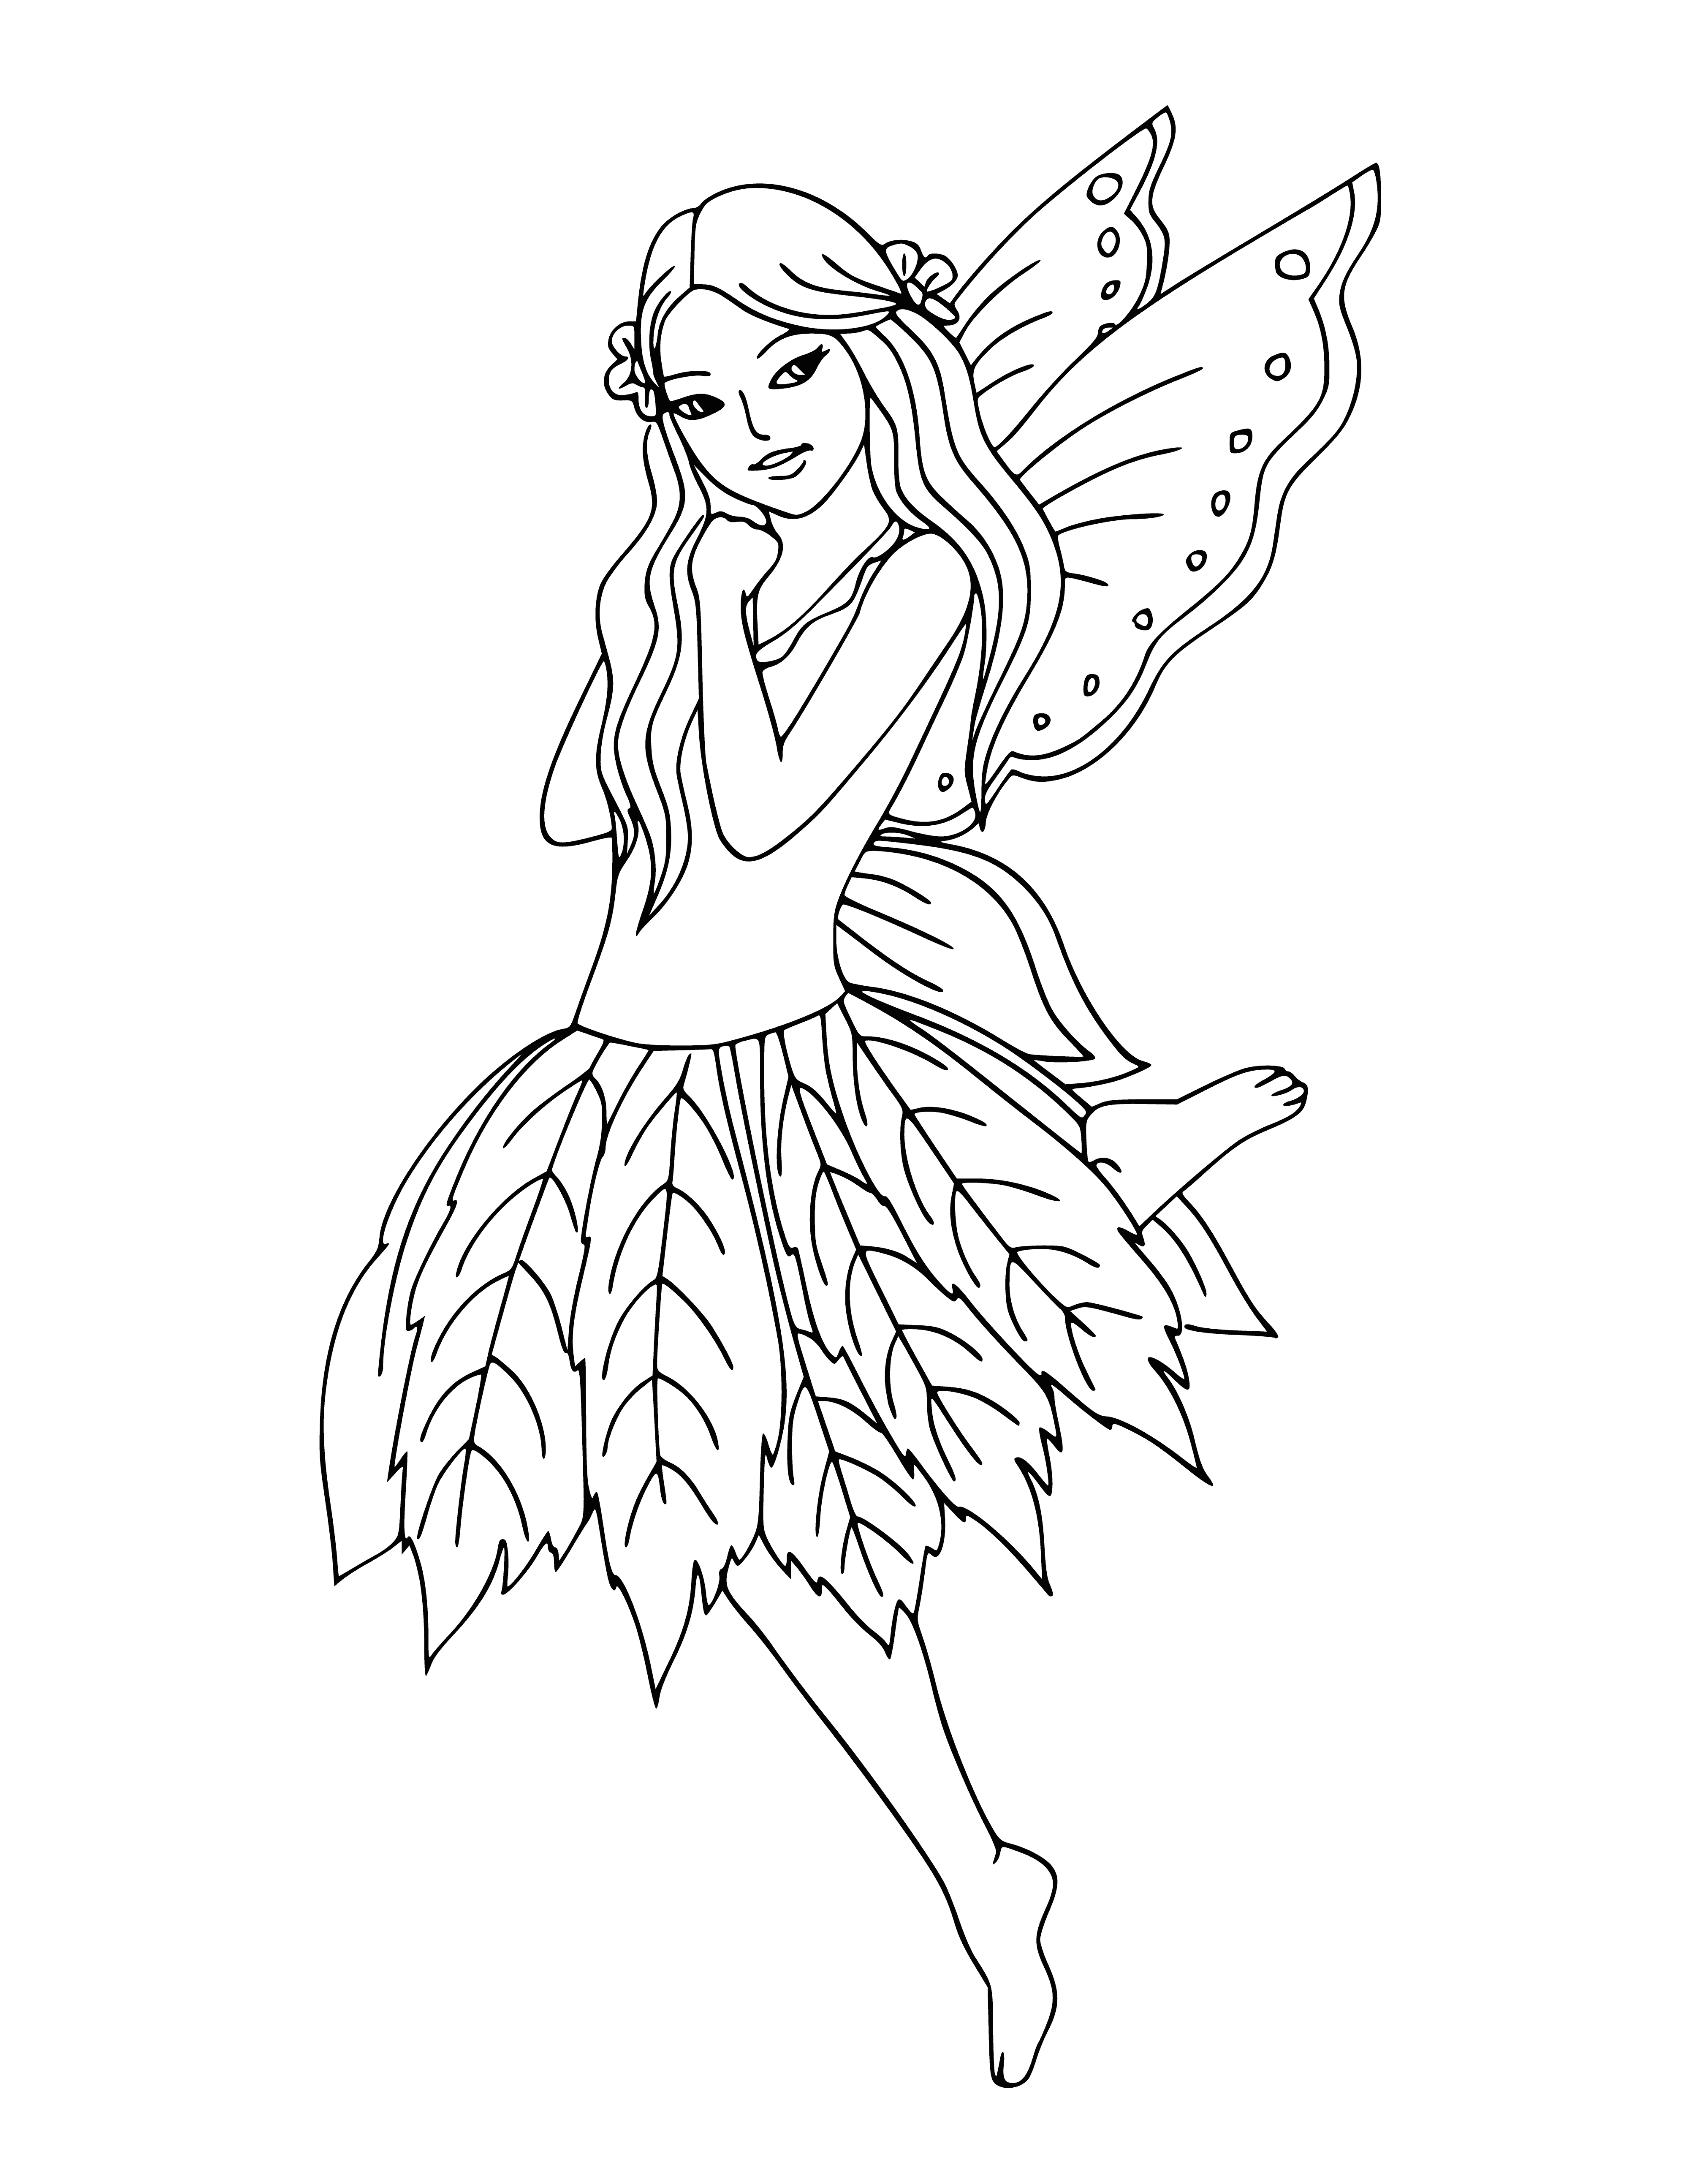 Fairy in a skirt made of leaves coloring page